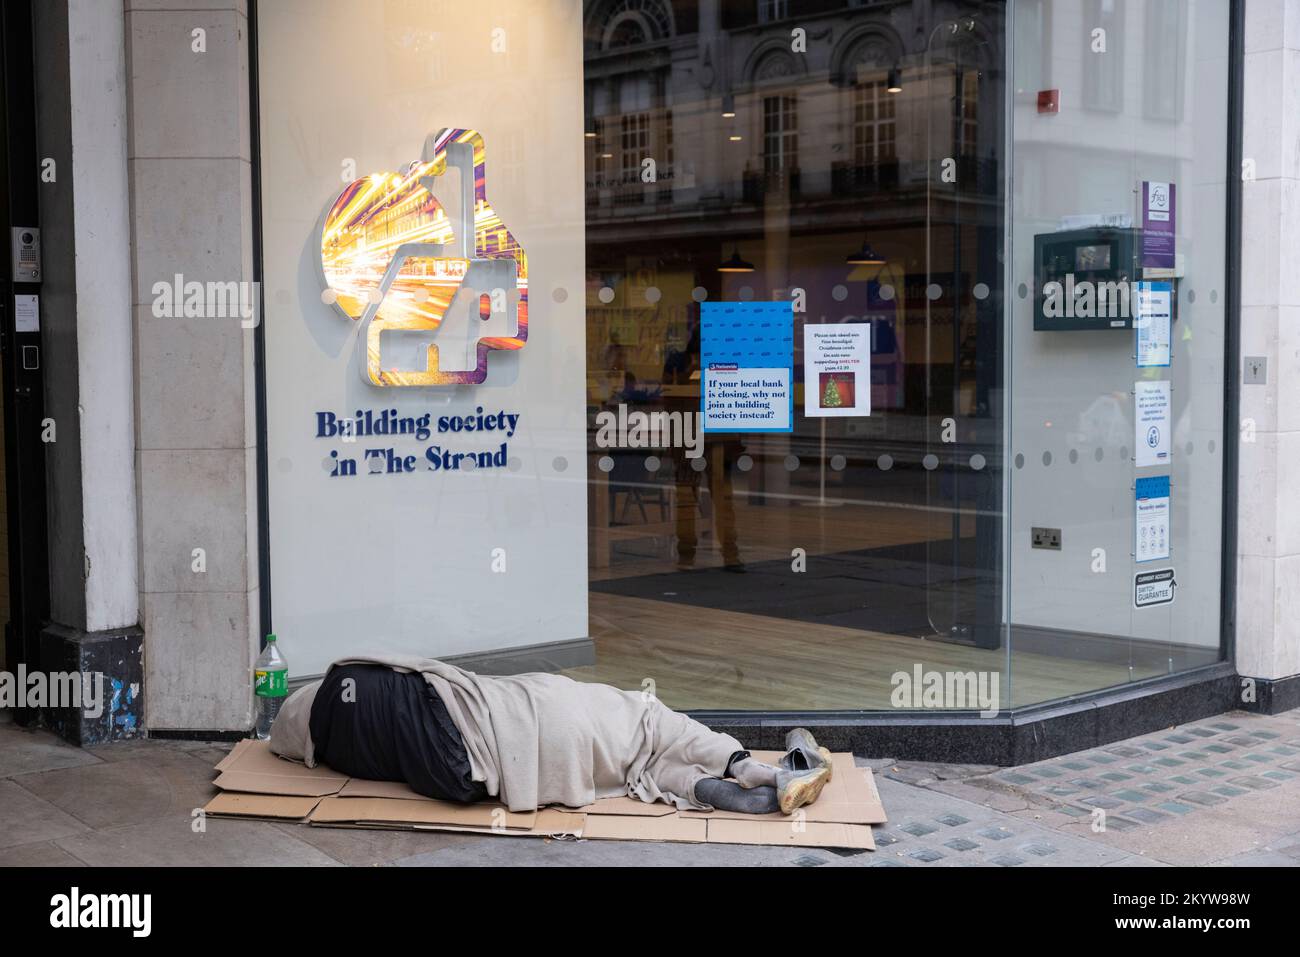 Homeless man sleeps outside the premises of a Nationwide Building Society, along the Strand in central London, United Kingdom Stock Photo